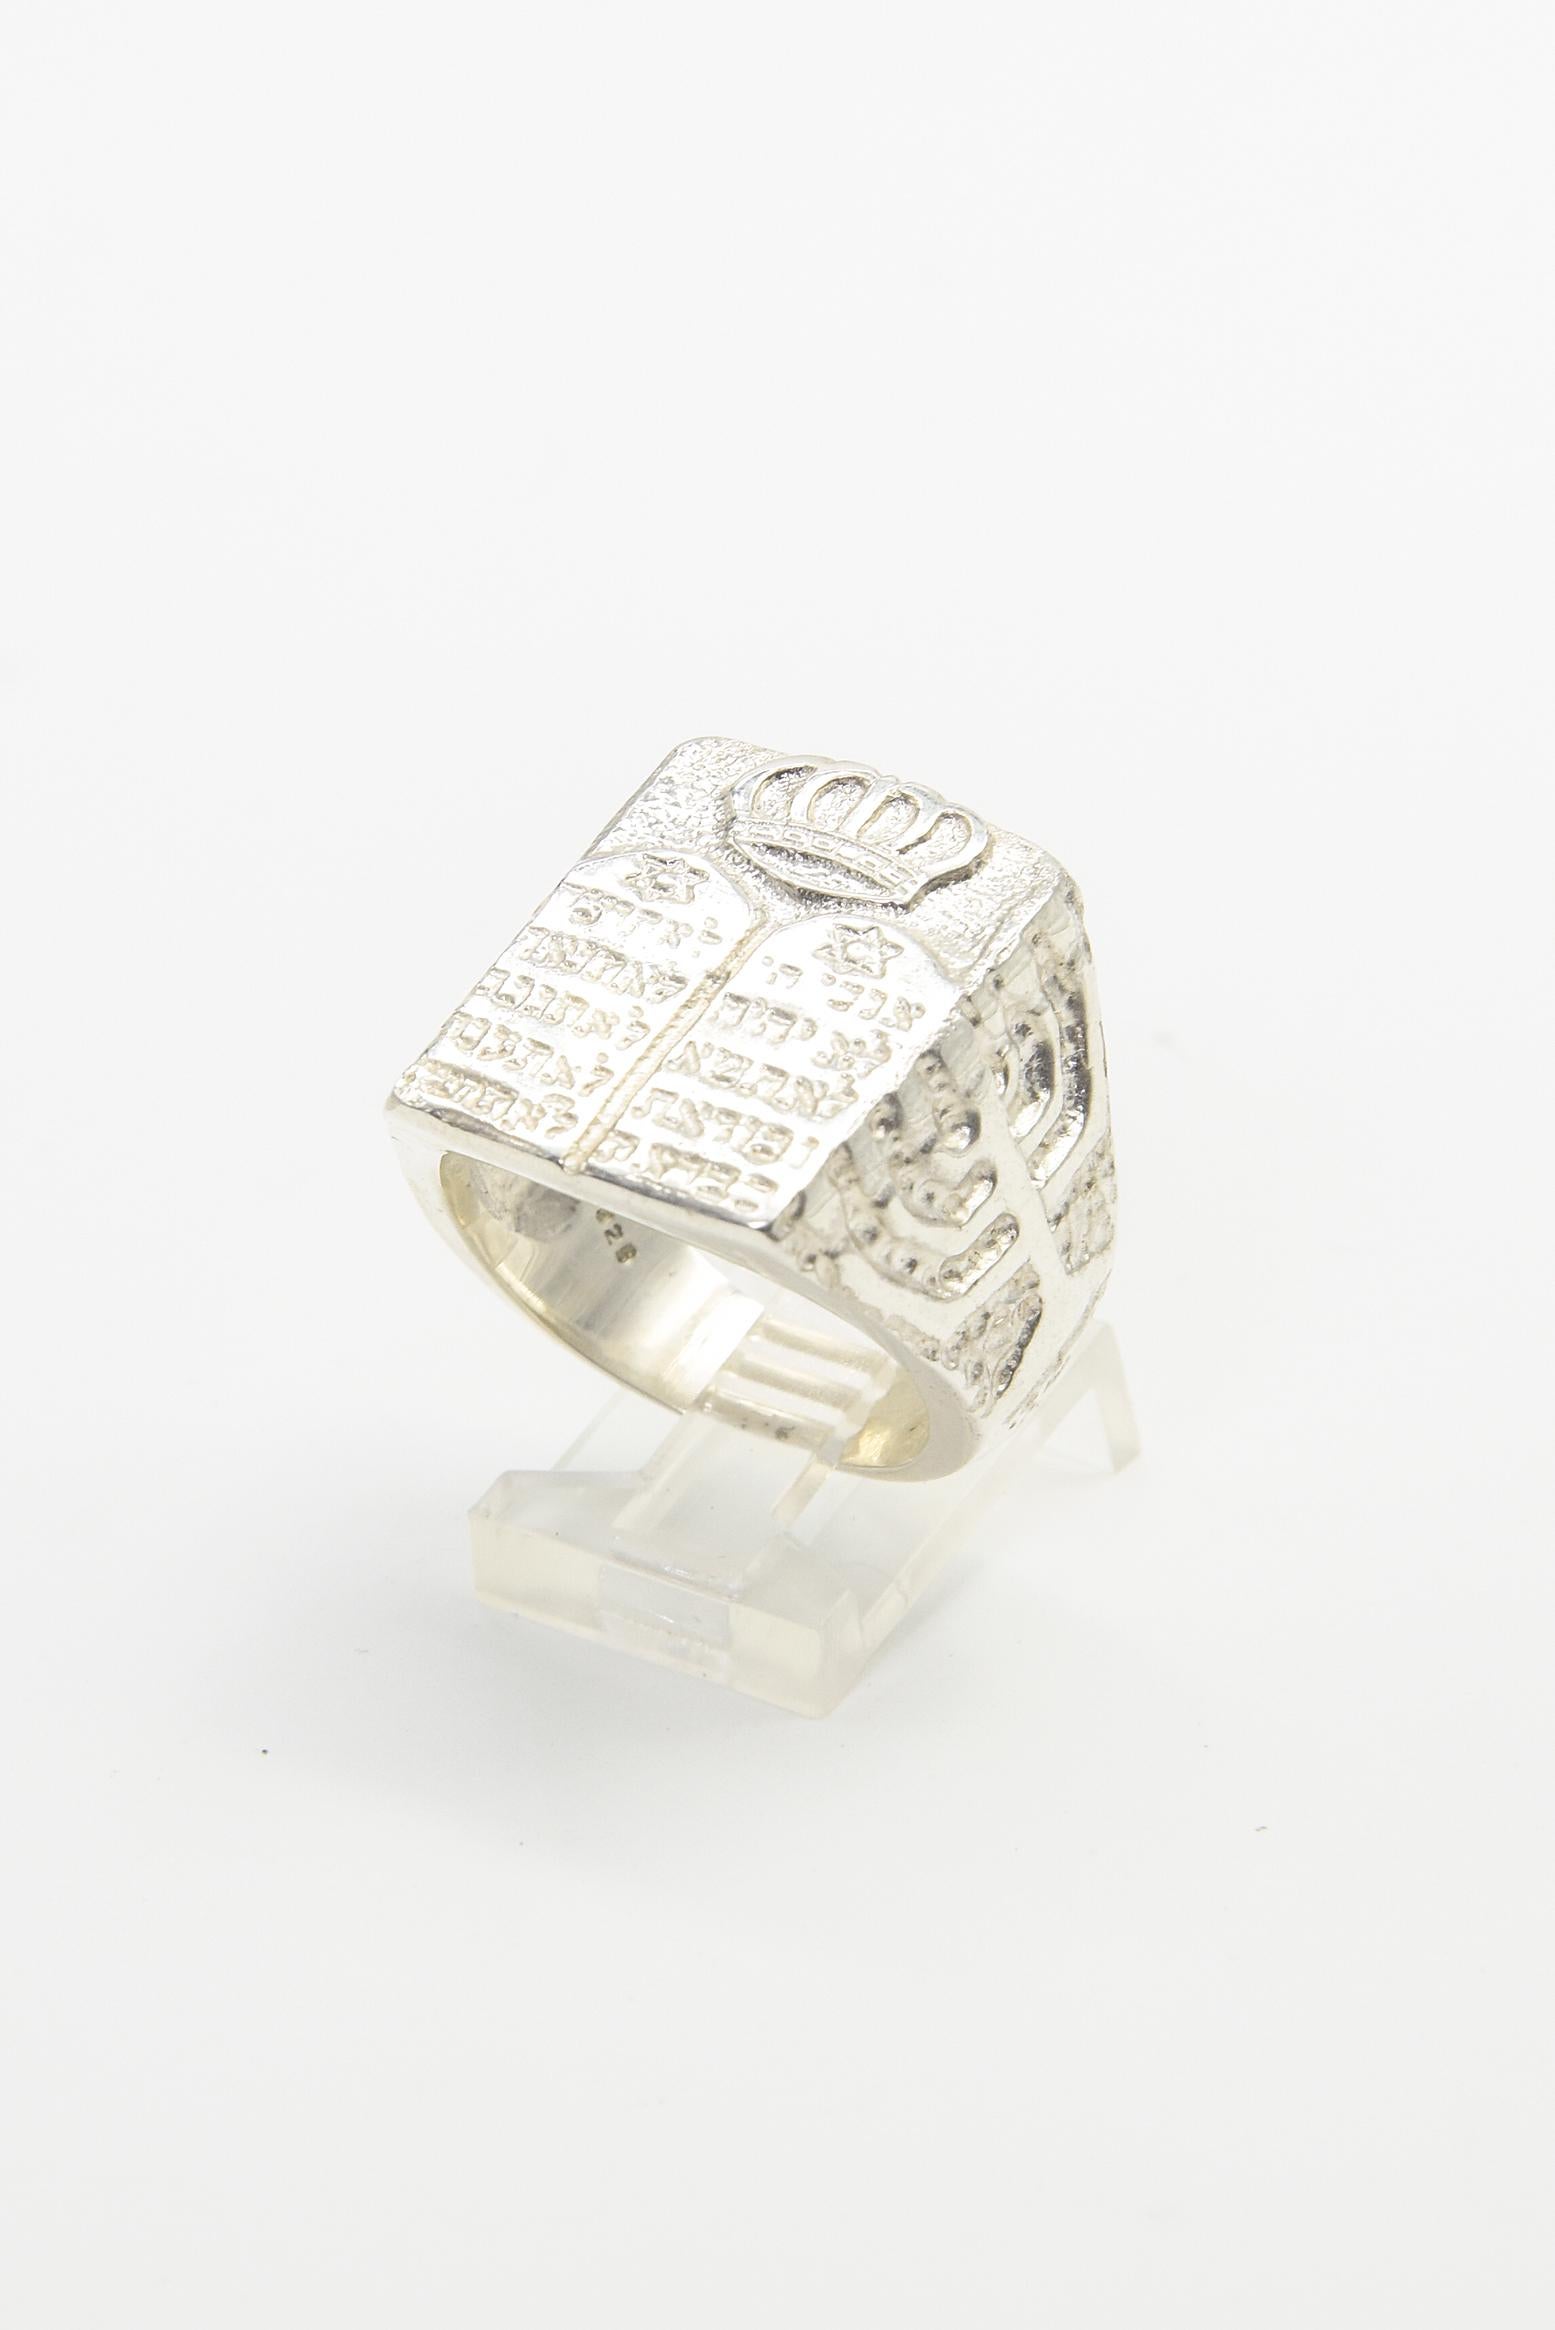 Impressive sterling silver ring featuring the Ten Commandments and a Torah Crown on the front. The Judaica theme is continued with one side having the Star of David and the other side having a Menorah.  The background is textured and the design and